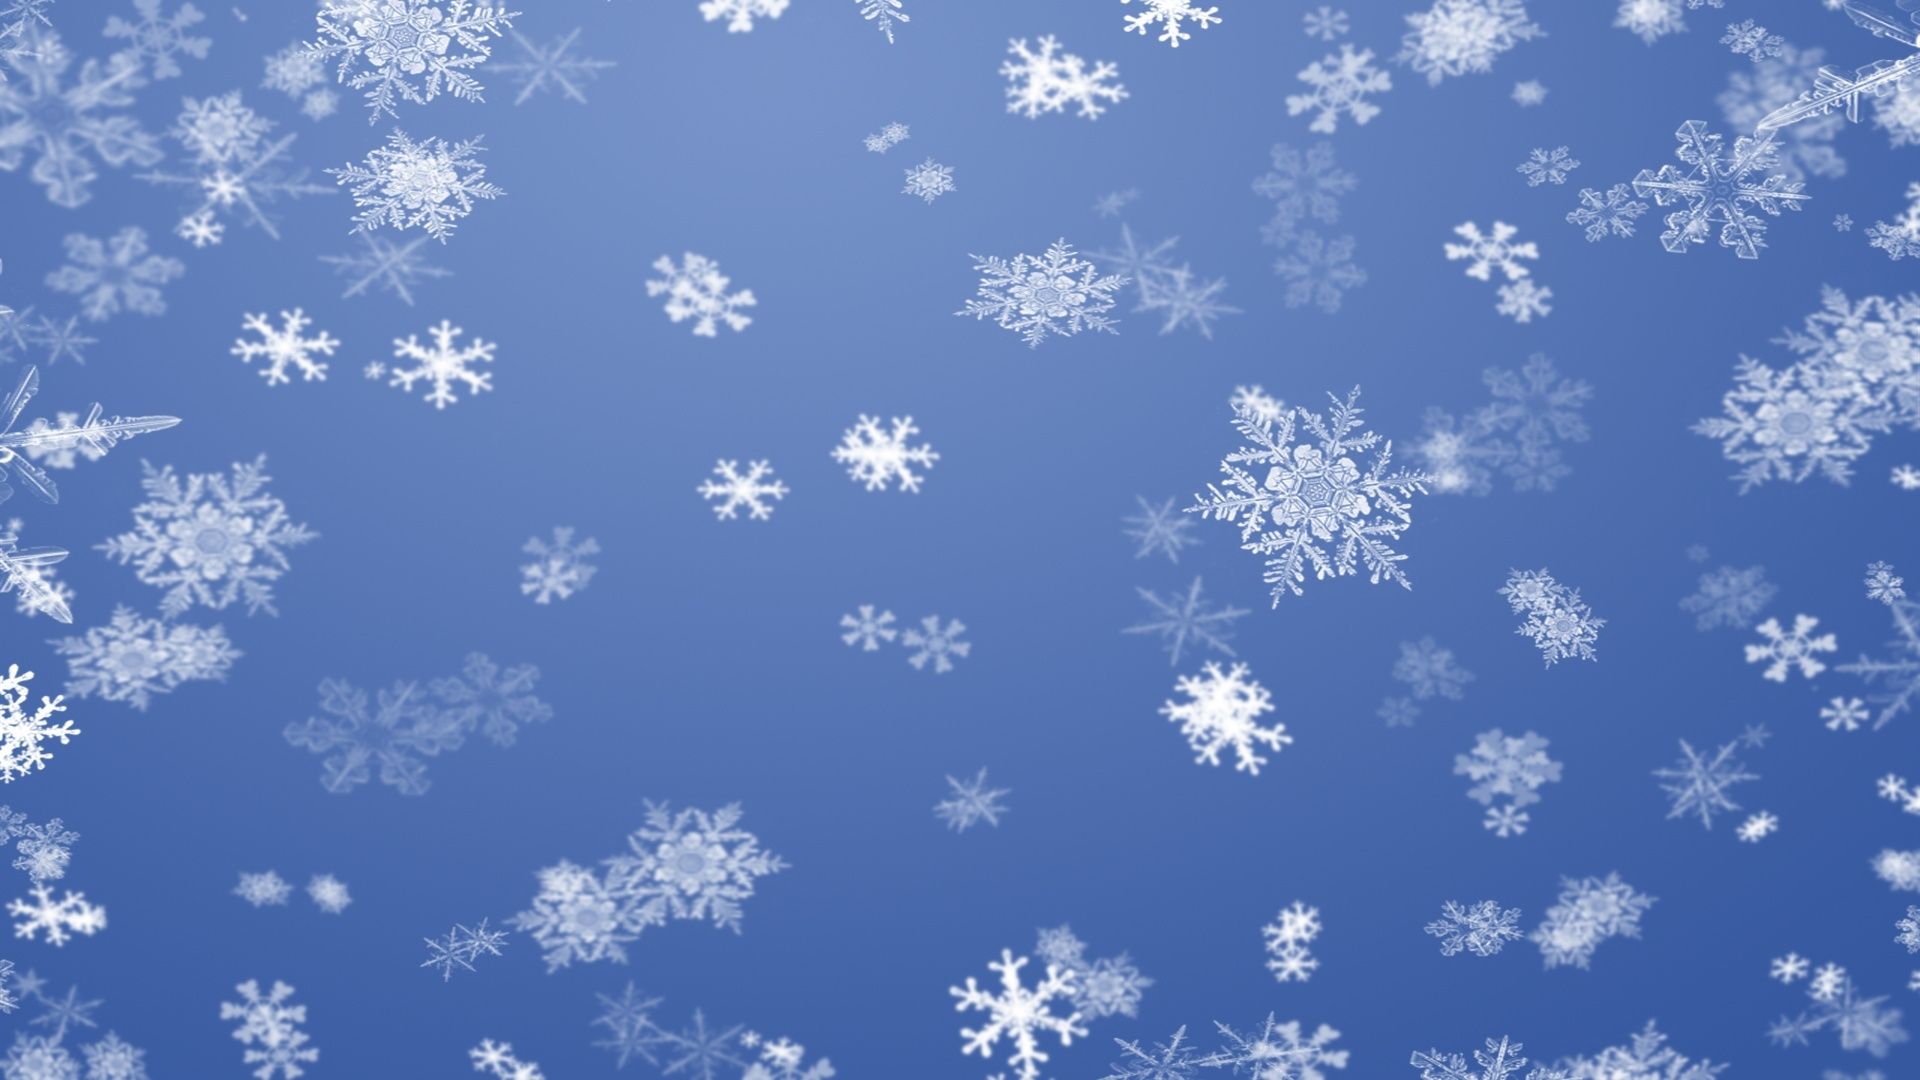 download-wallpaper-snowflake-wallpaper-x-background | Alcoa First ...